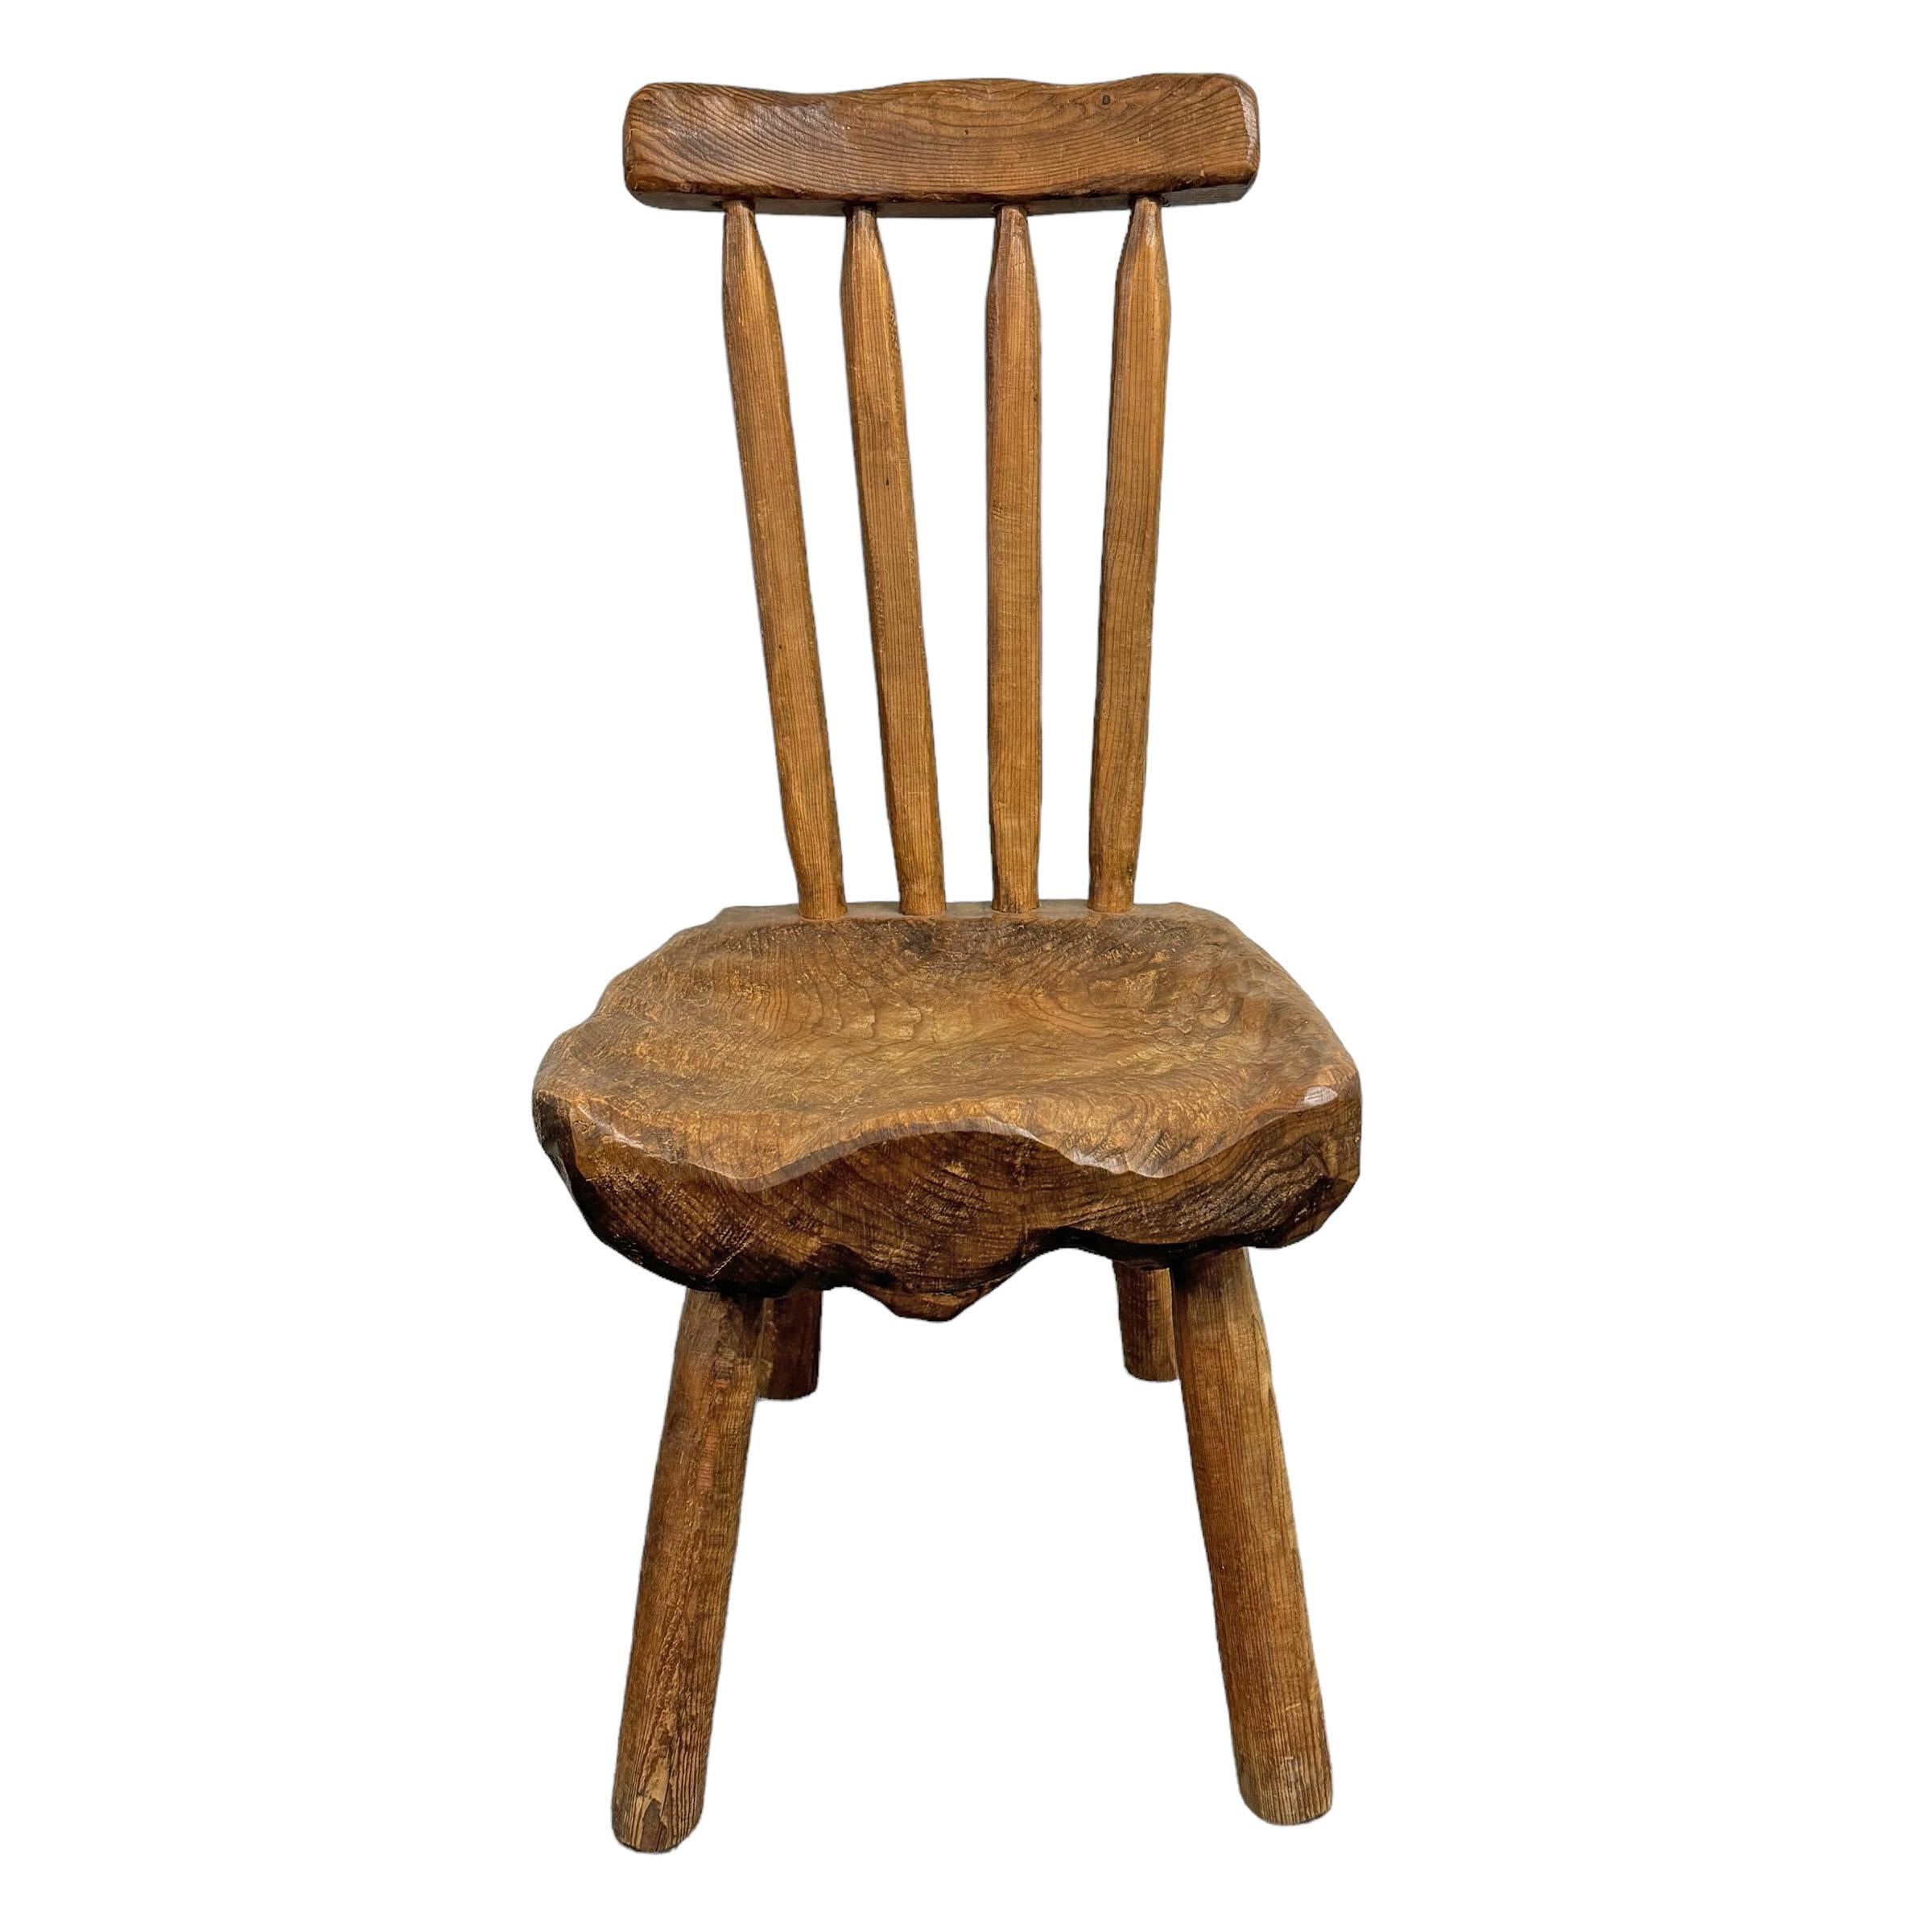 Hand-Carved Early 20th Century French Folk Art Chair For Sale